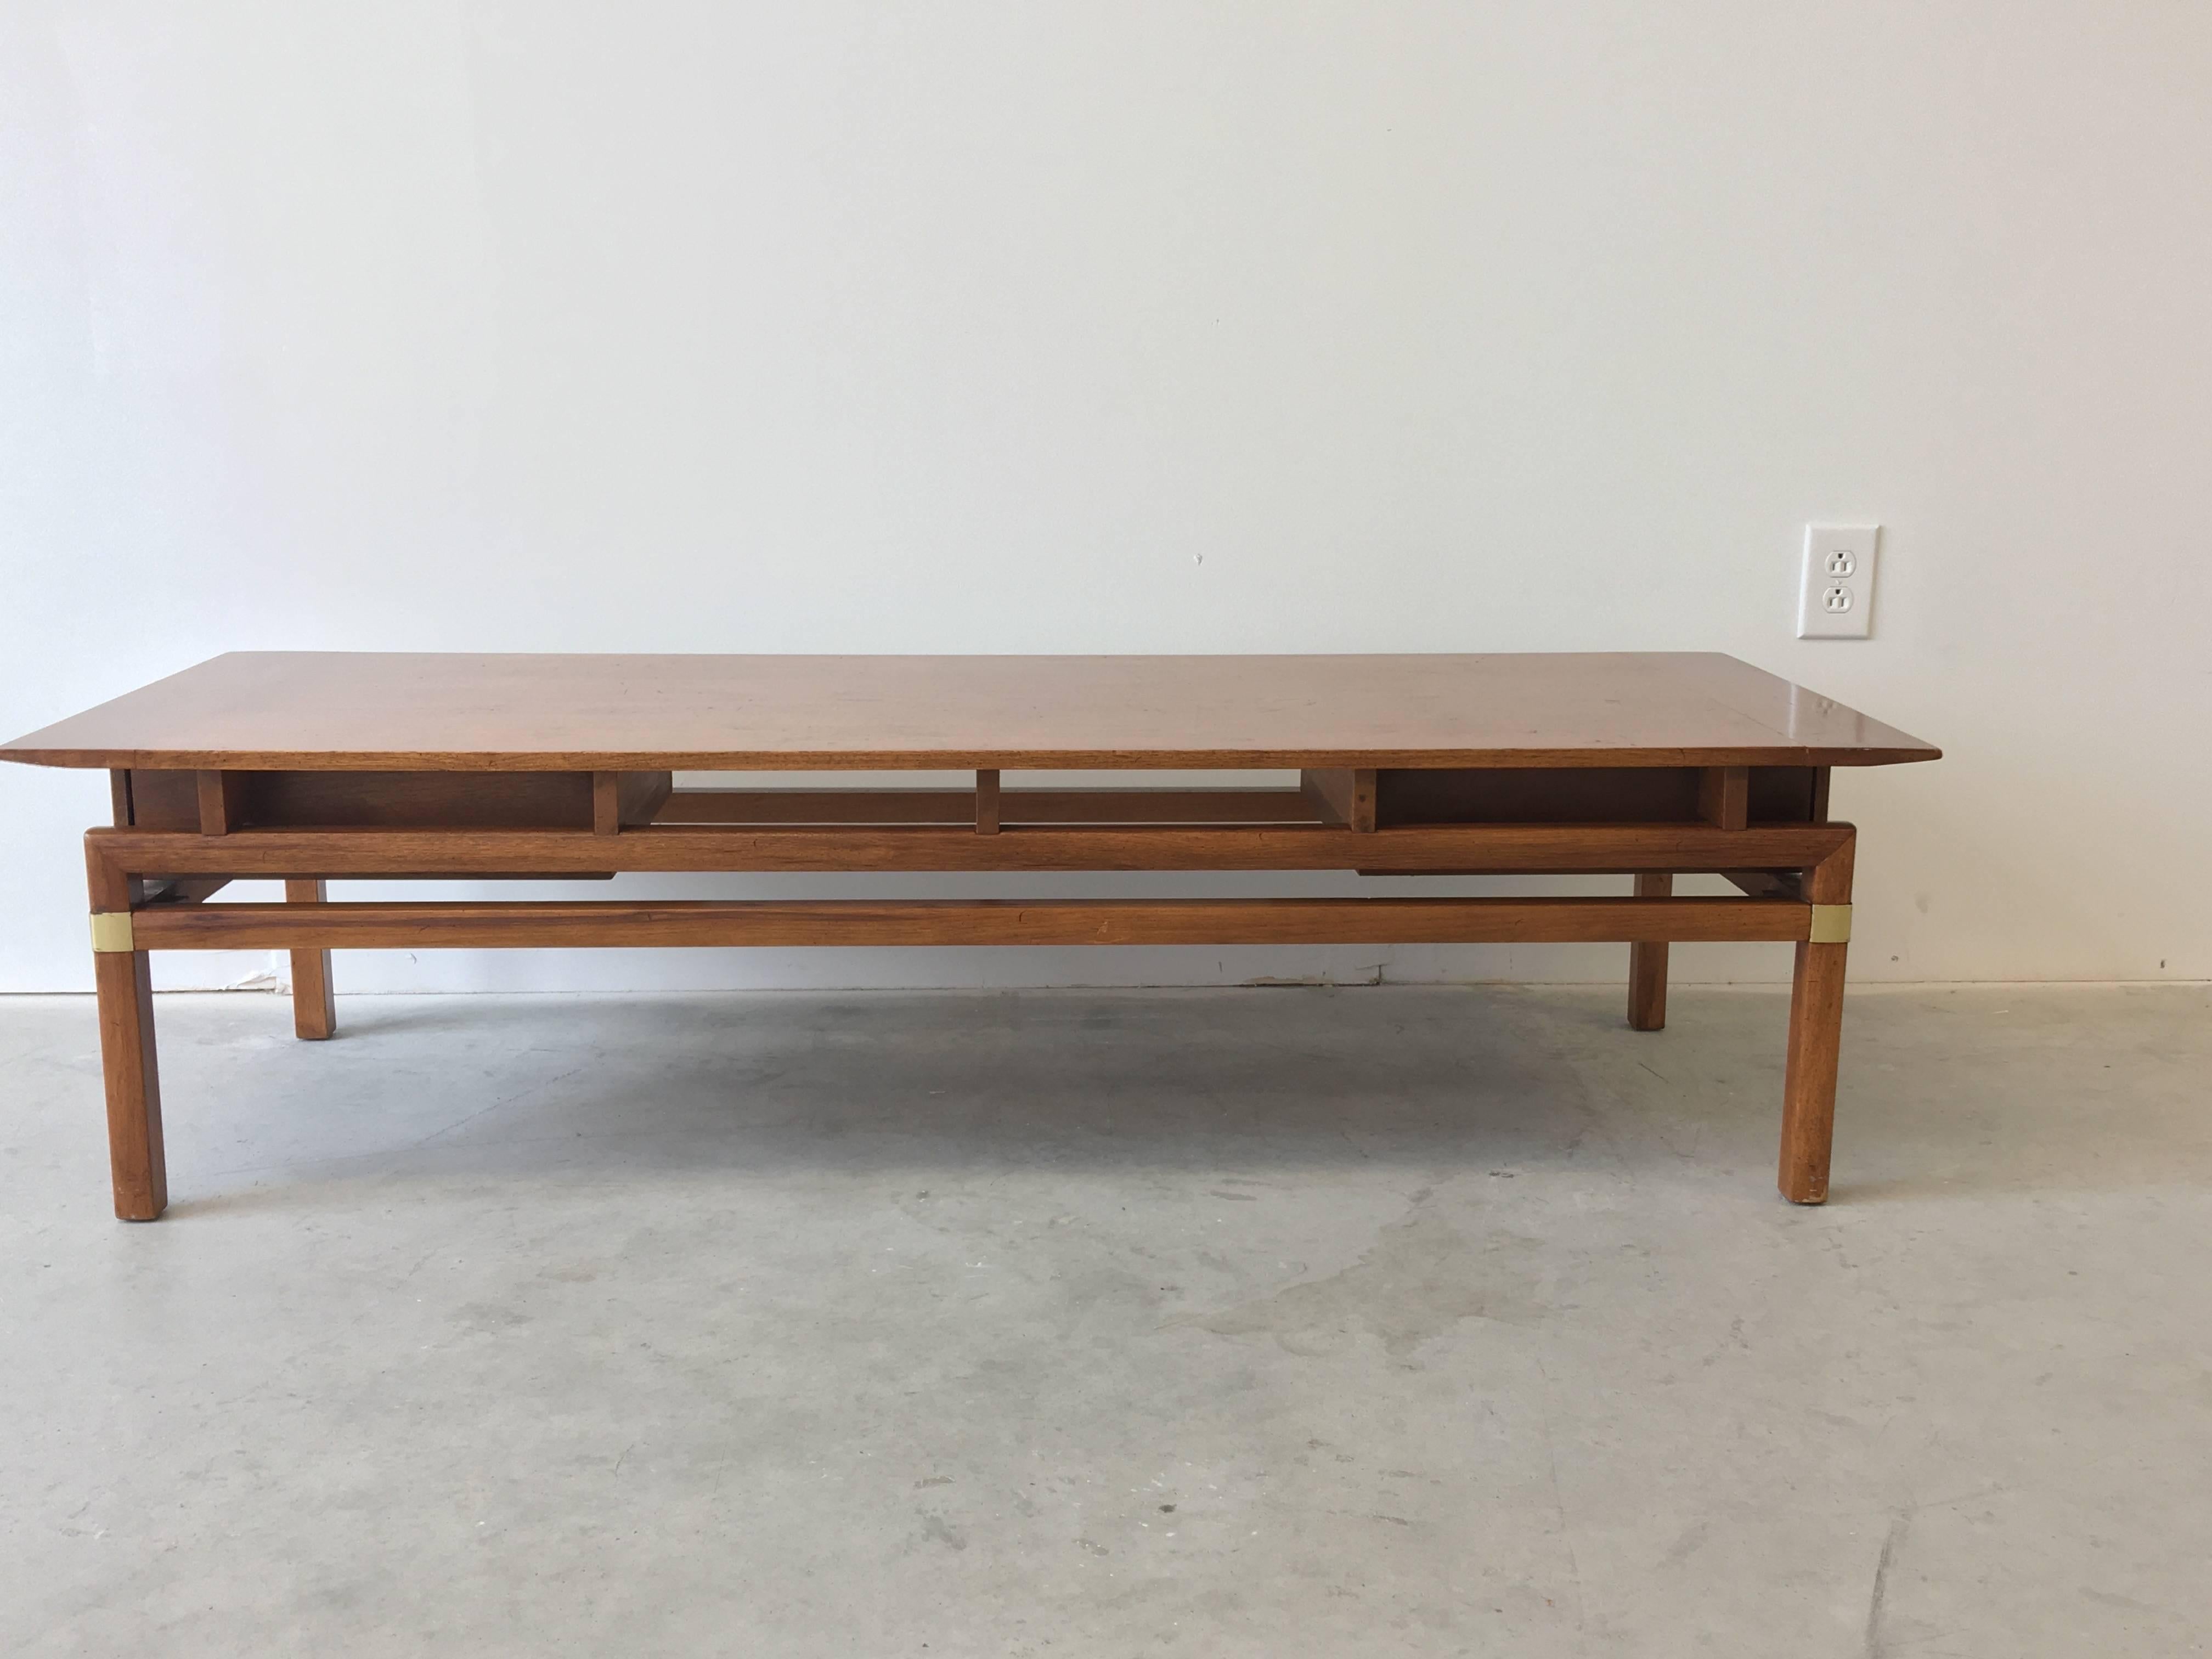 Offered is a fabulous, 1980's Hollywood Regency, Hickory coffee table. Walnut/oak finish with brass hardware. Two drawers.